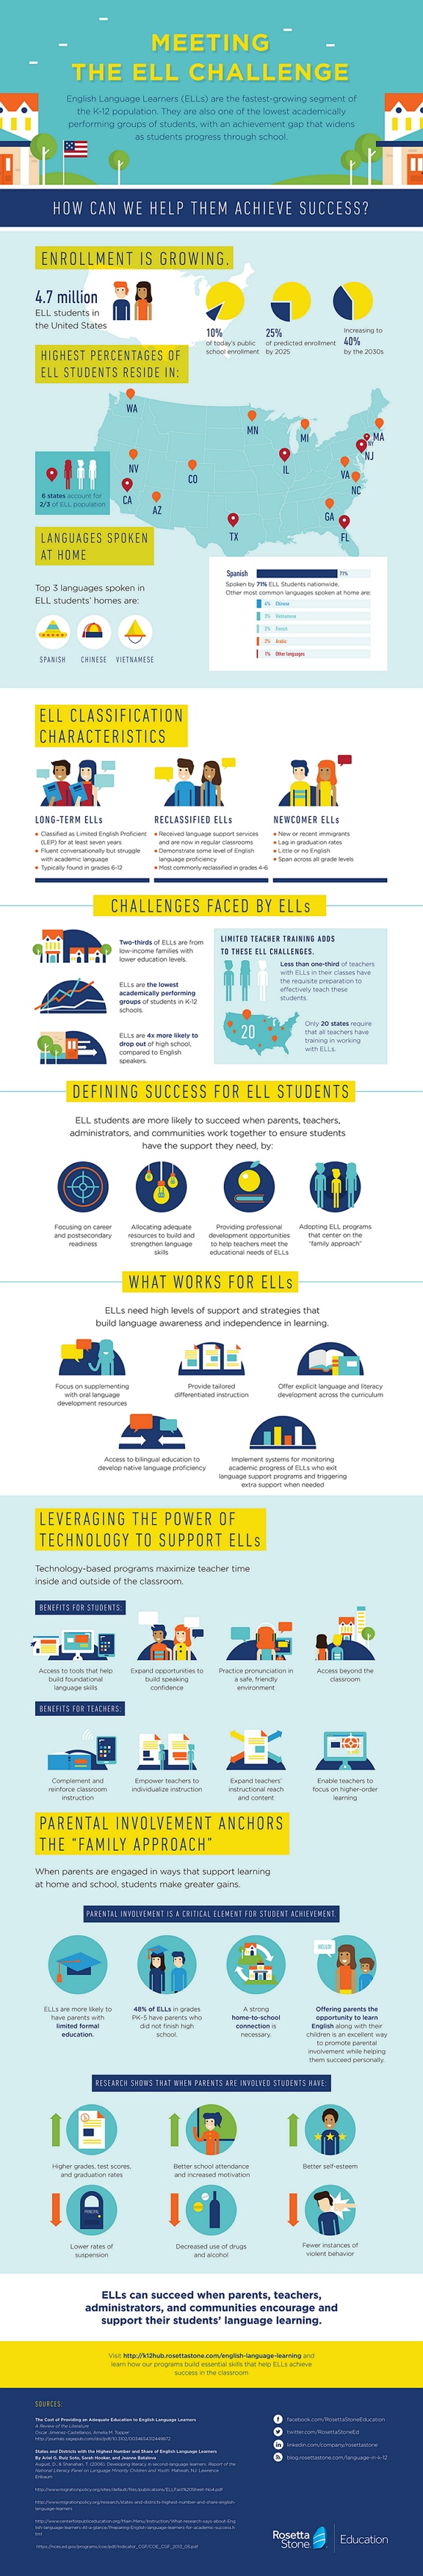 Meeting the English Language Learner Challenge Infographic